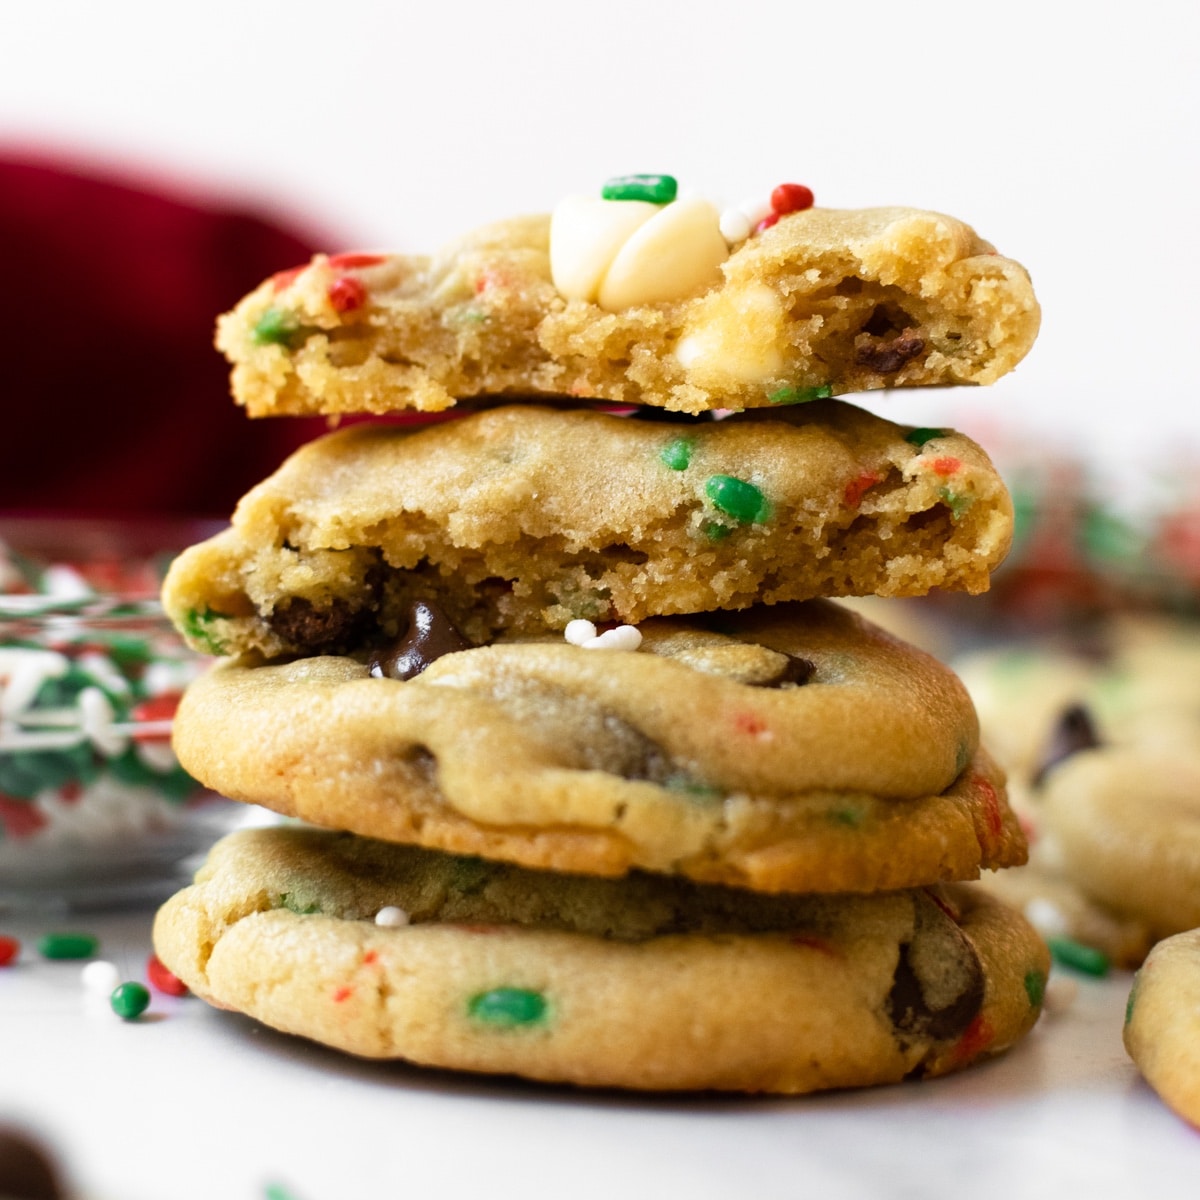 I'm certain that will love these cake batter chocolate chip cookies! Enjoy a chewy cookie with slightly crisp edges studded with white chocolate chips and festive sprinkles. These taste like a cross between chocolate chip cookies mixed with funfetti vanilla cake— truly a cookie recipe that you'll make over and over again!